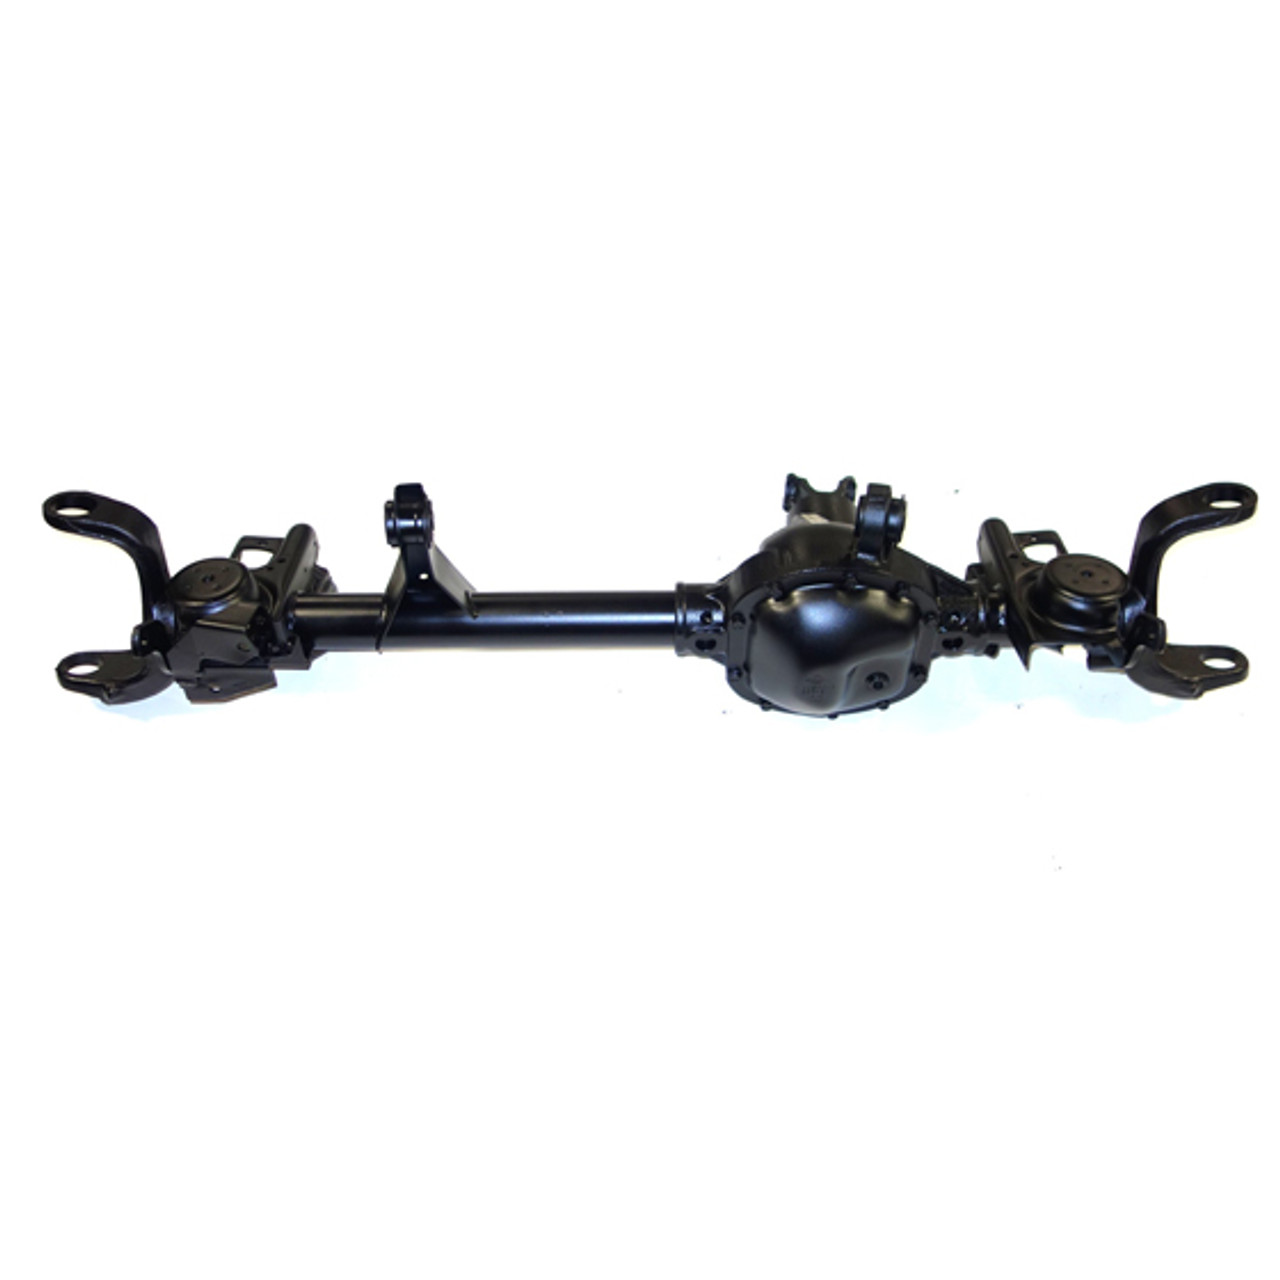 Reman Complete Axle Assembly for Dana 30 97-05 Jeep Wrangler 3.07 Ratio with ABS